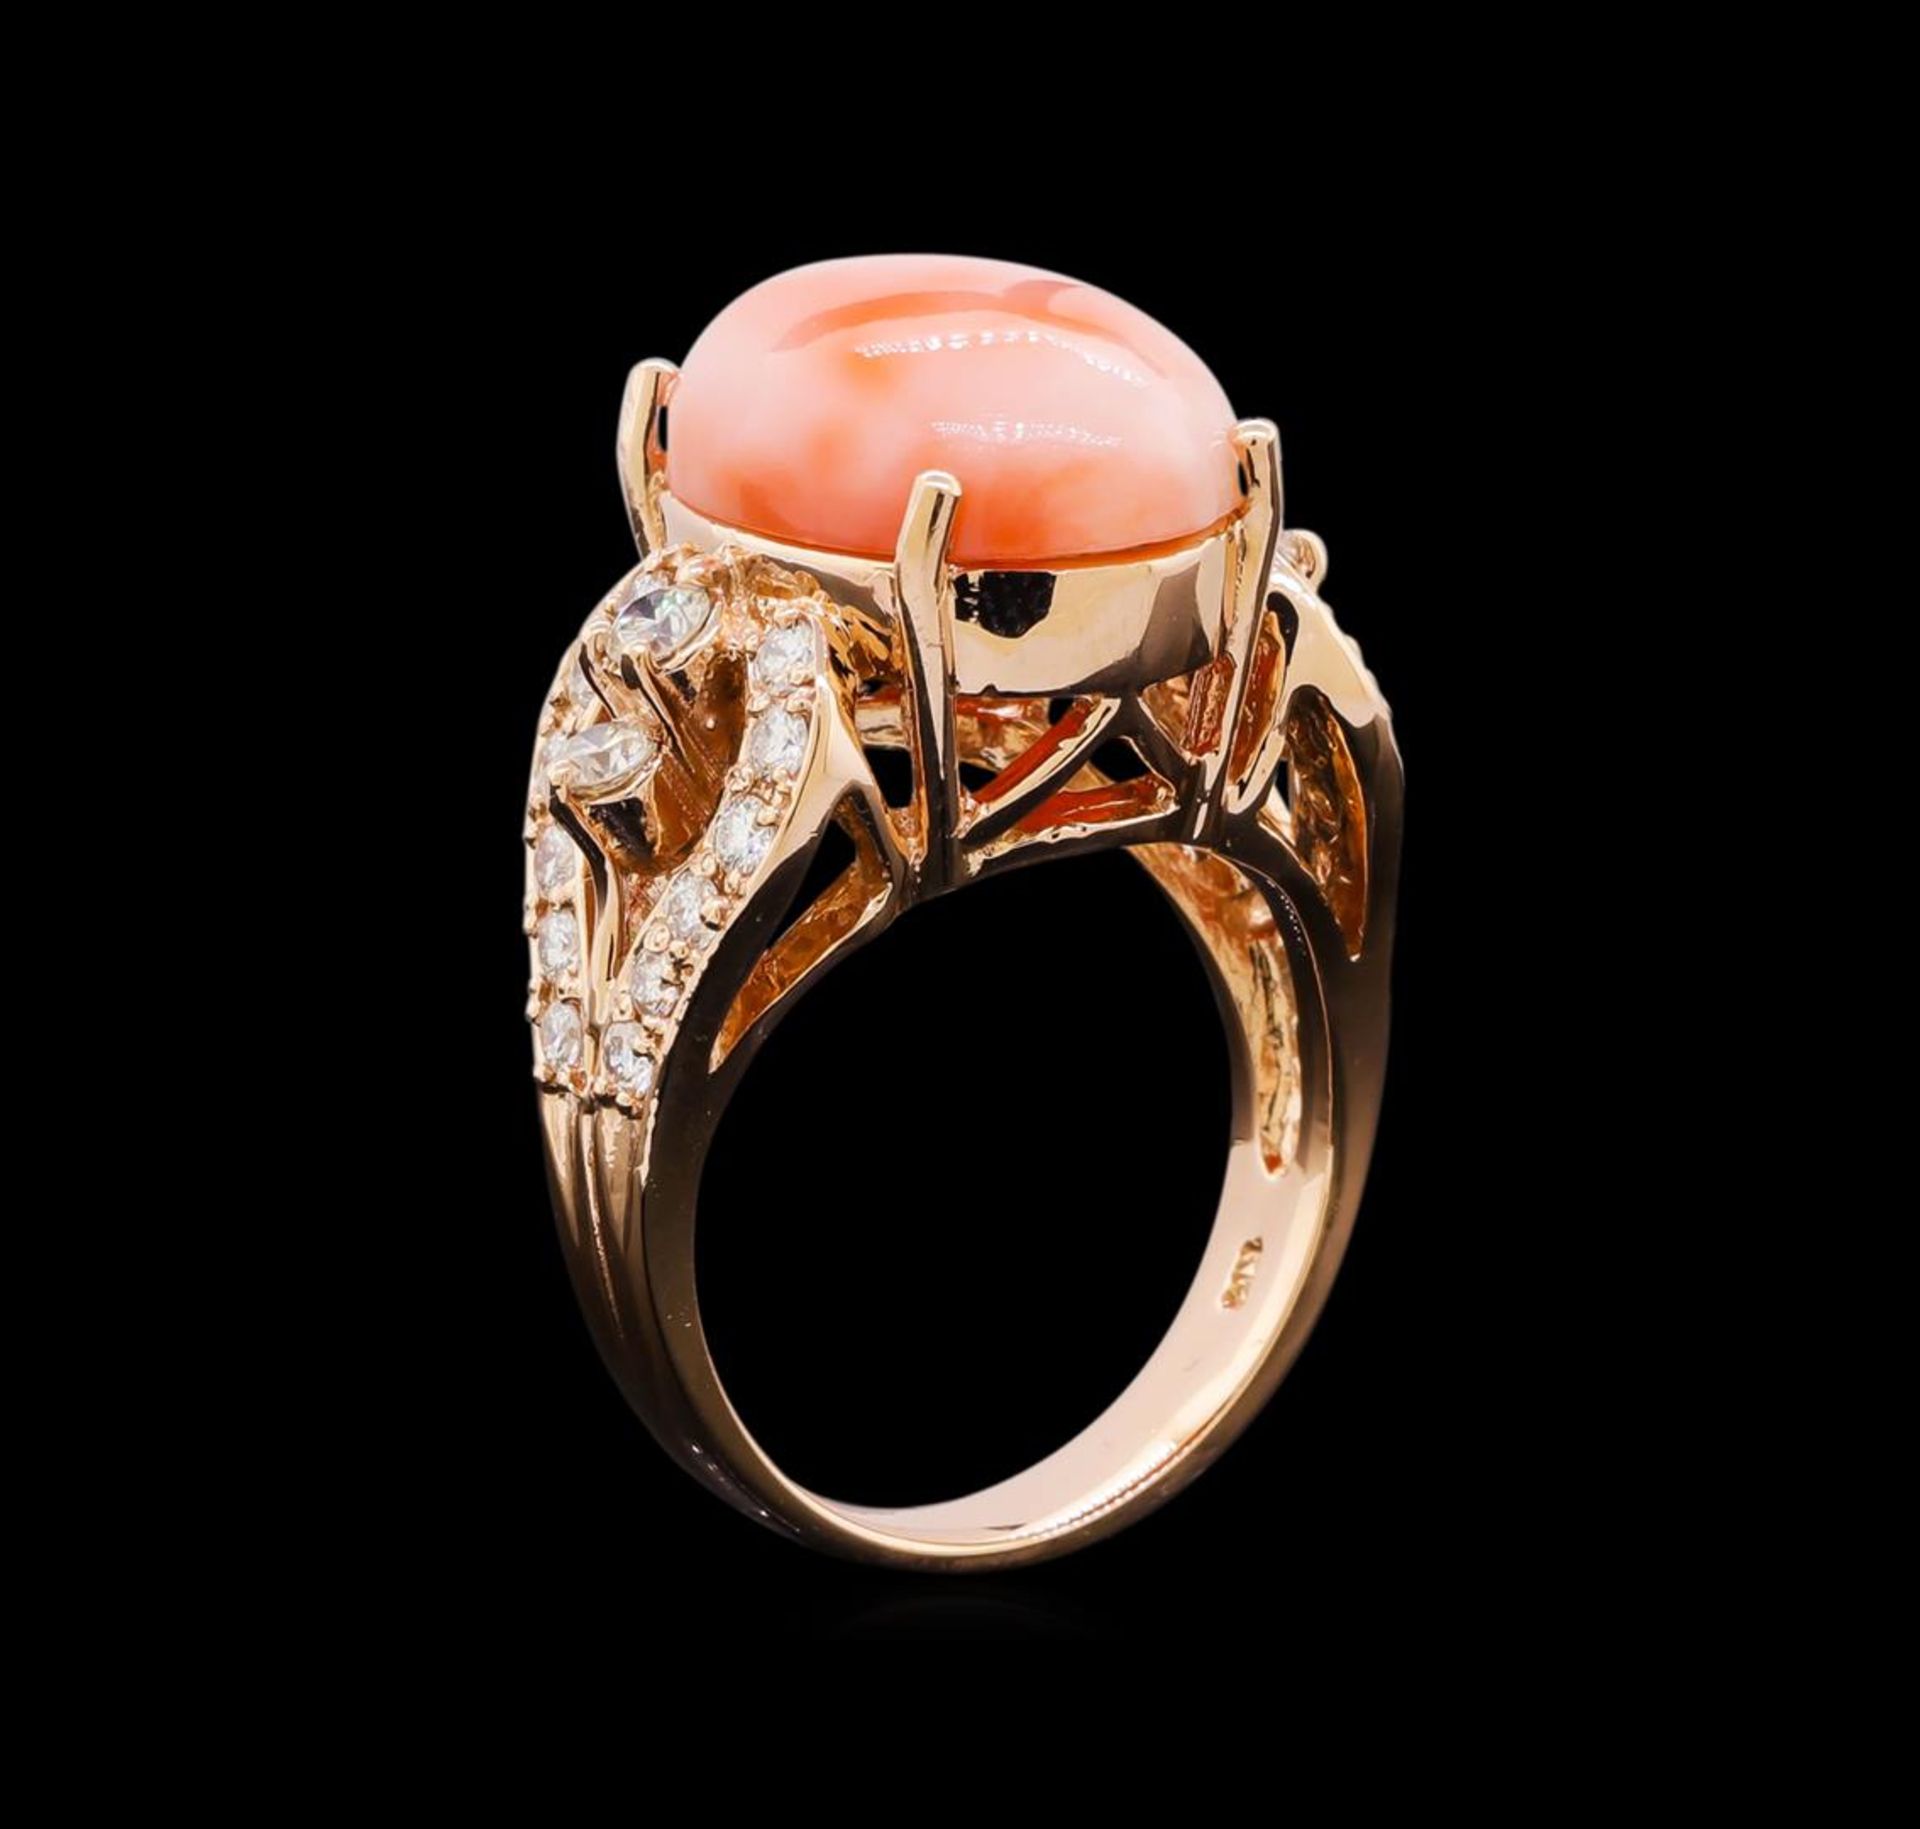 5.68 ctw Pink Coral and Diamond Ring - 14KT Rose Gold - Image 4 of 5